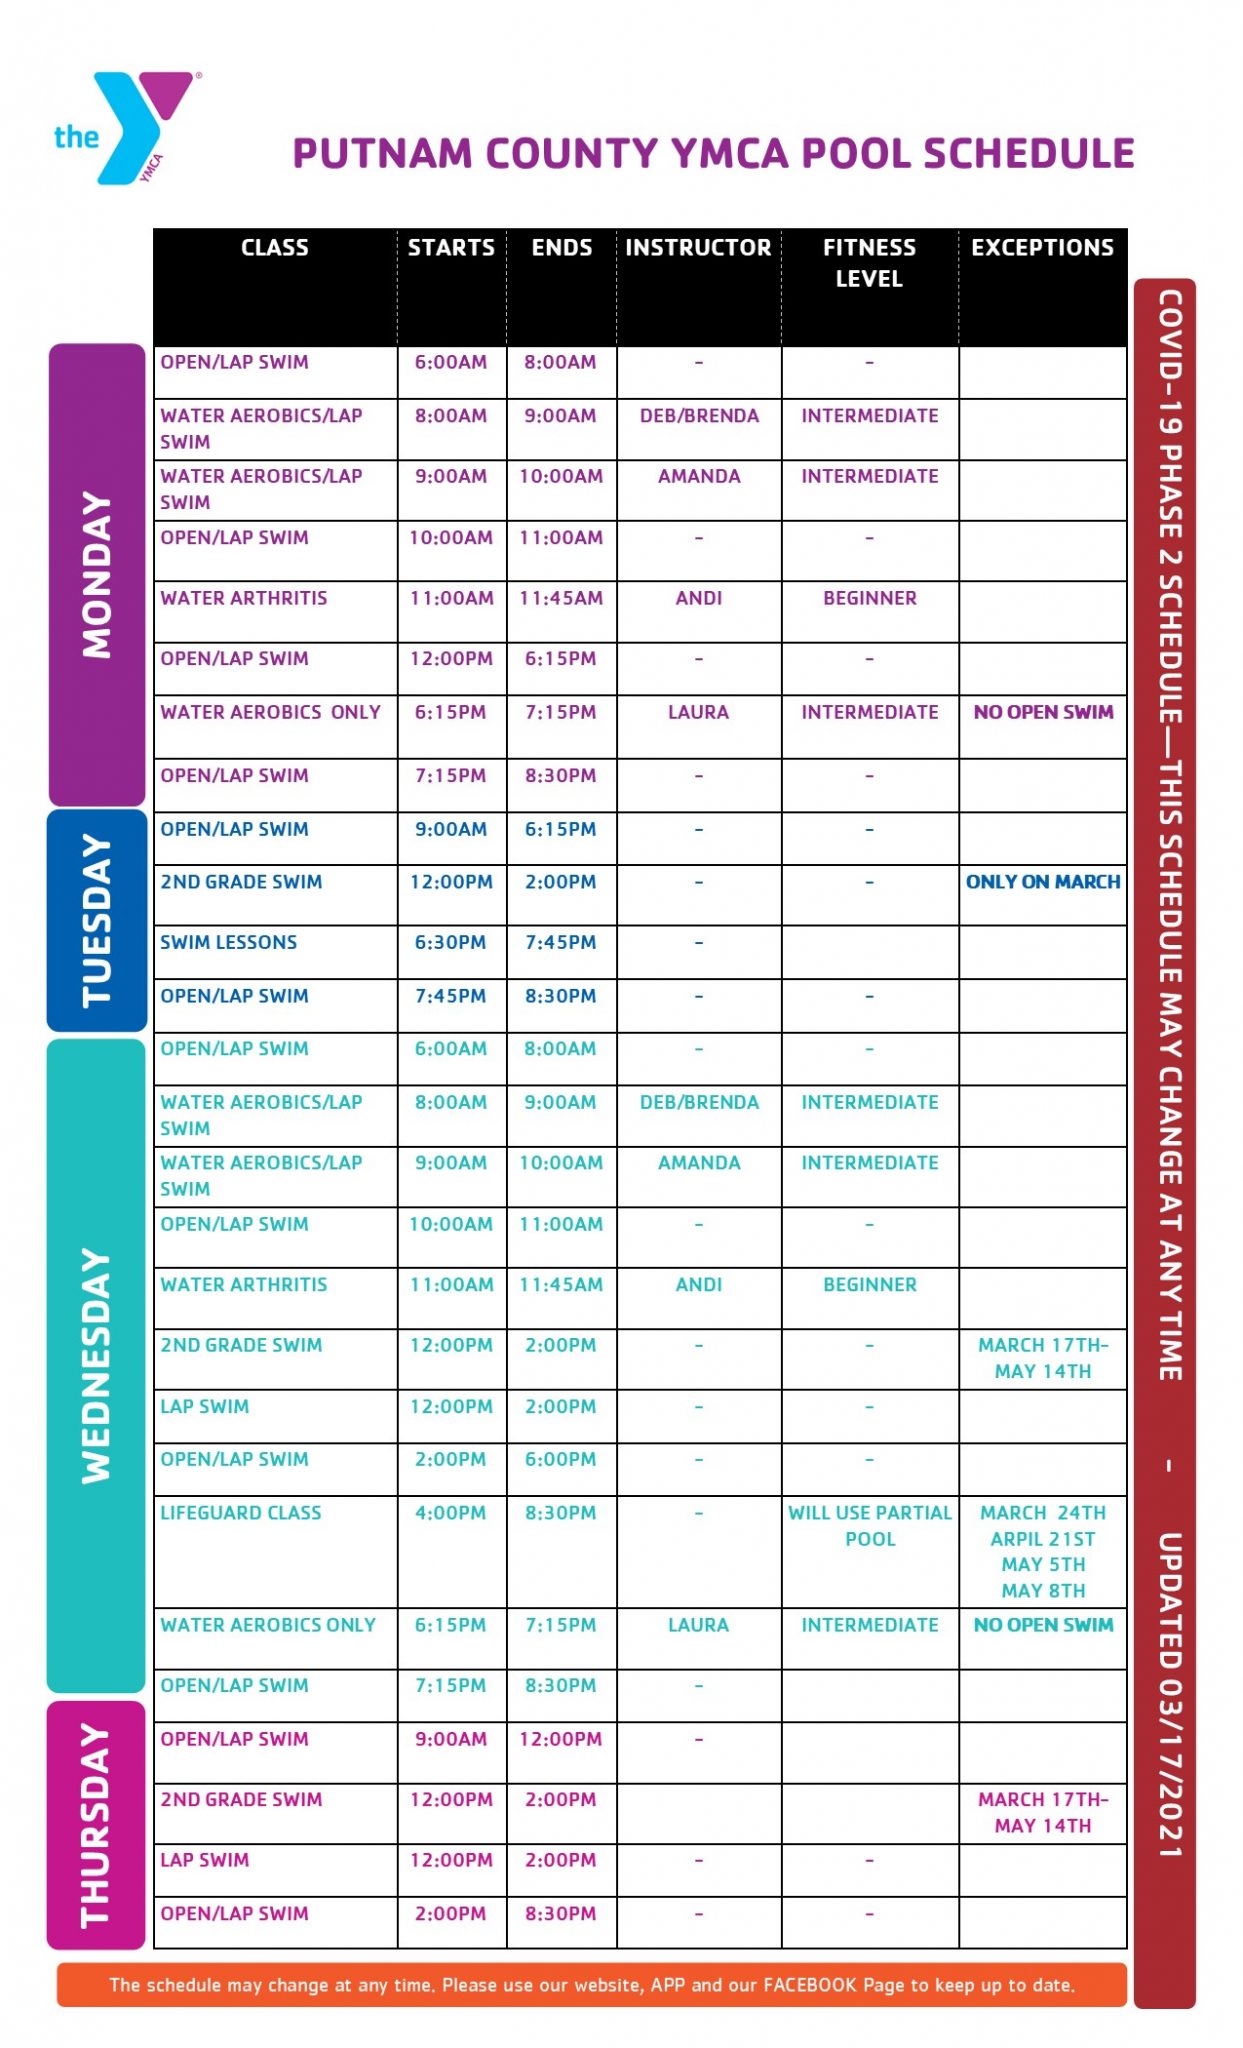 Pool Schedule Phase 2 | Putnam County YMCA